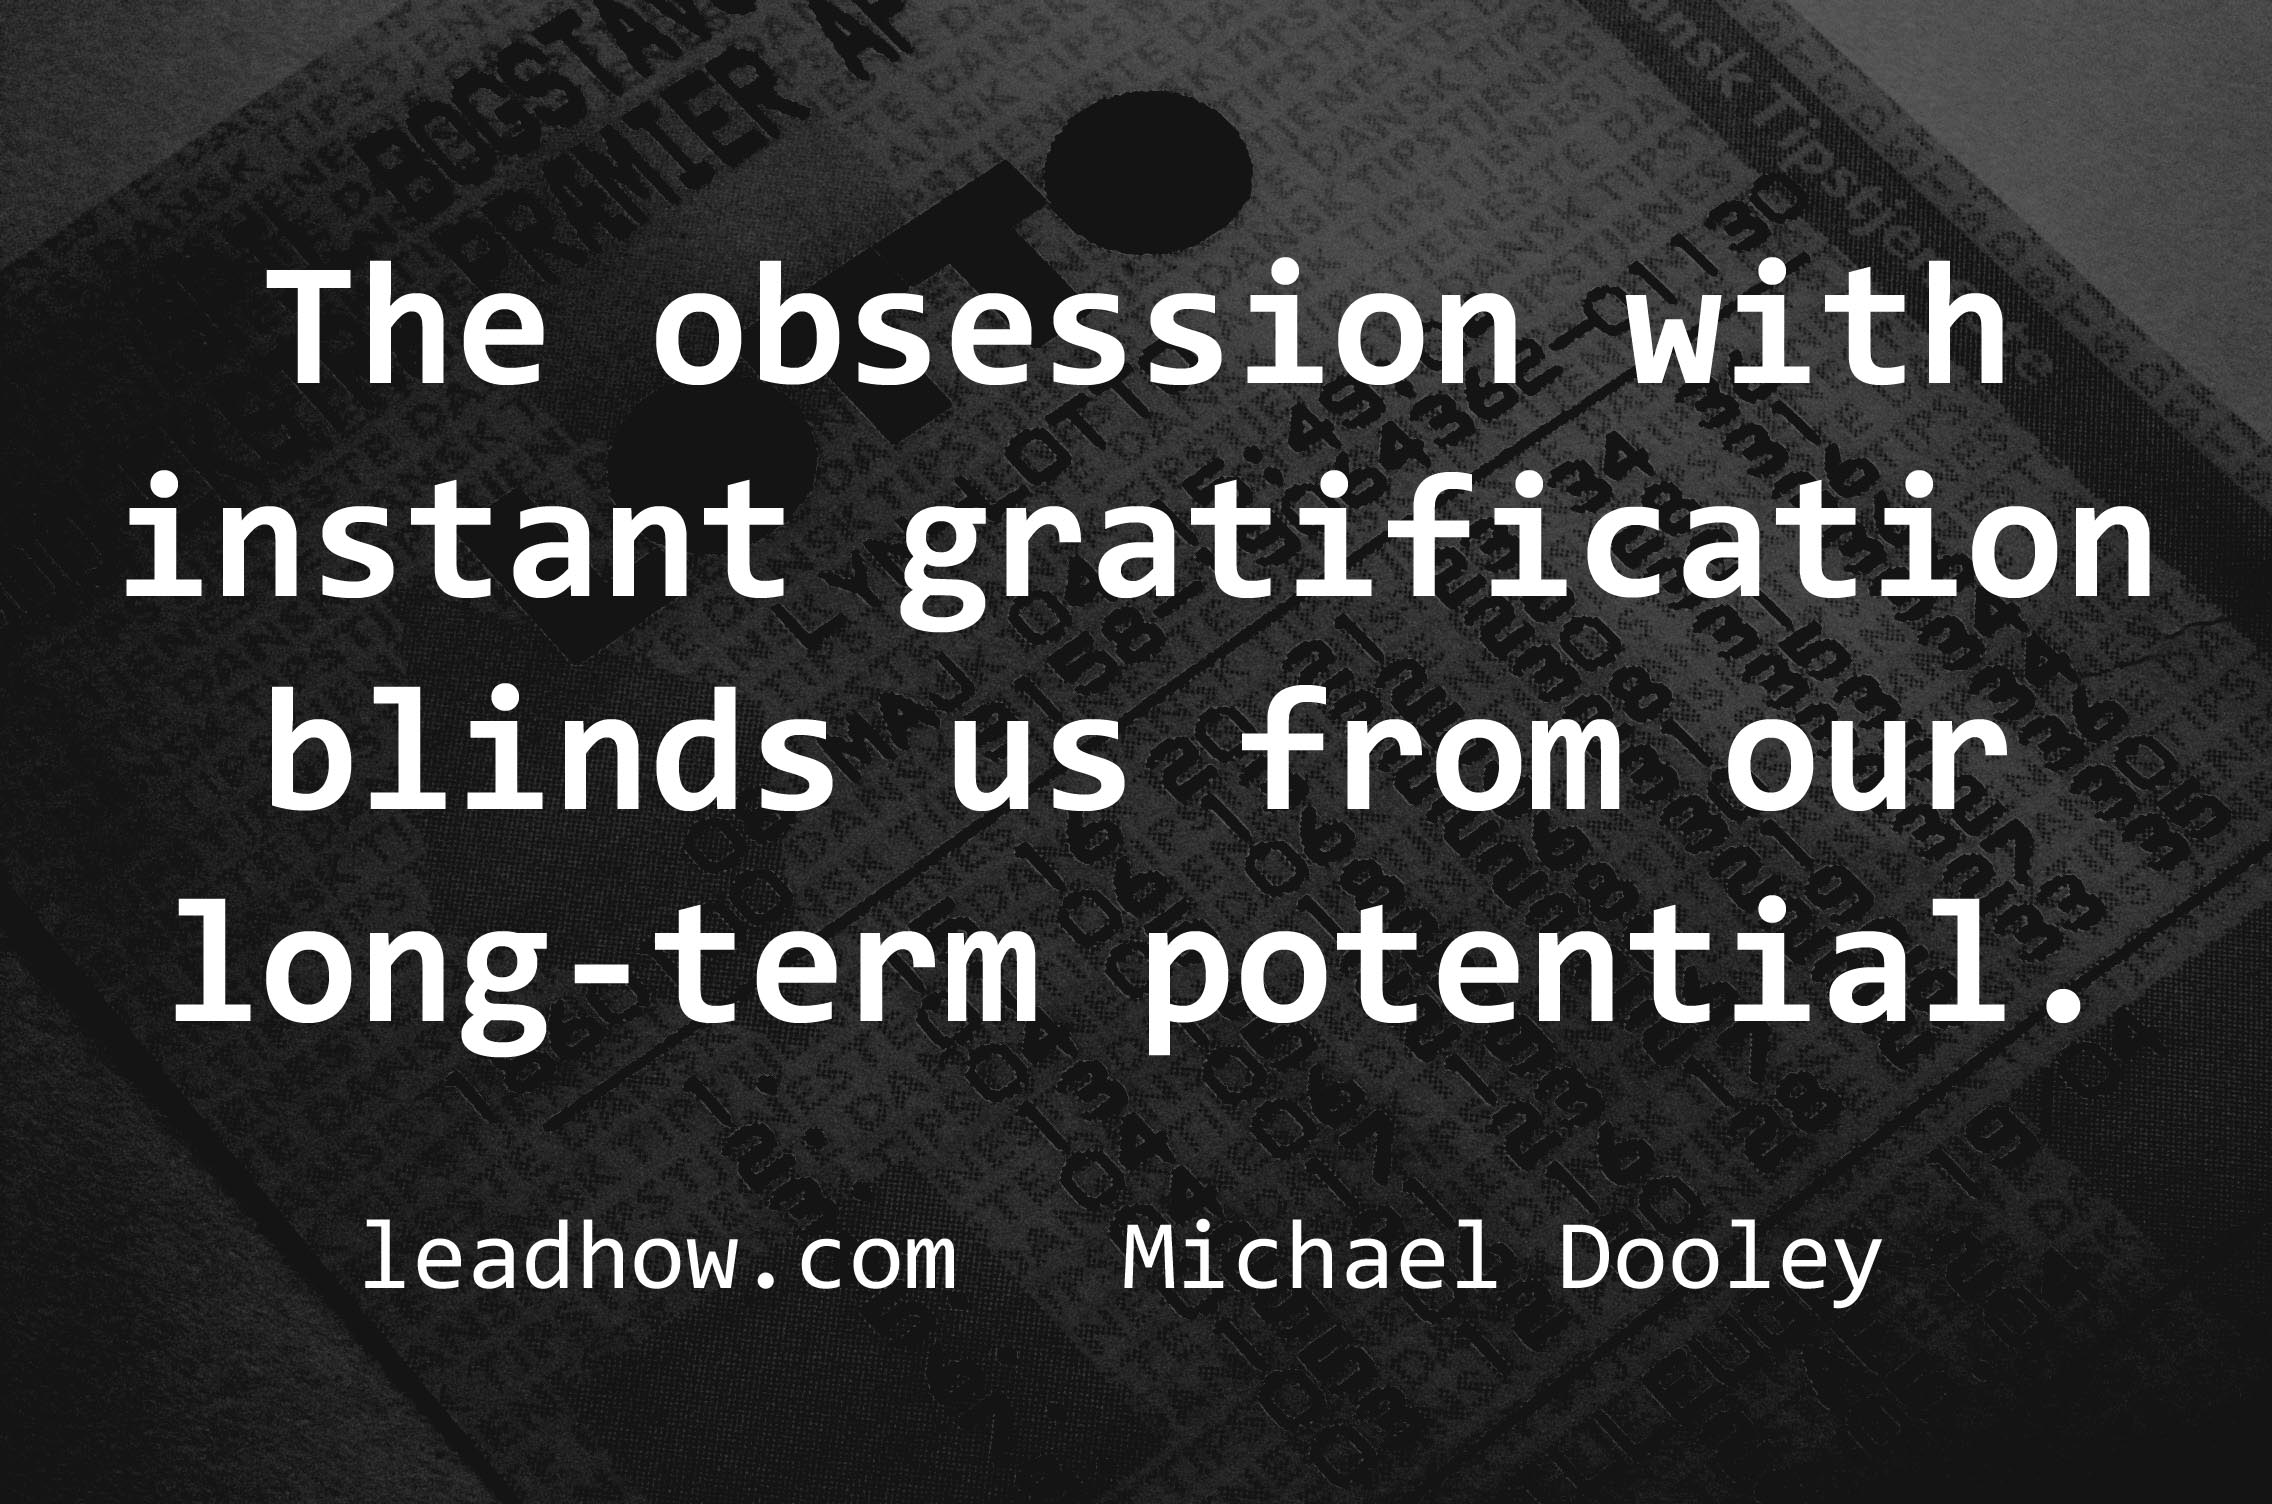 The obsession with instant gratification blinds us from our long-term potential. Mike Dooley